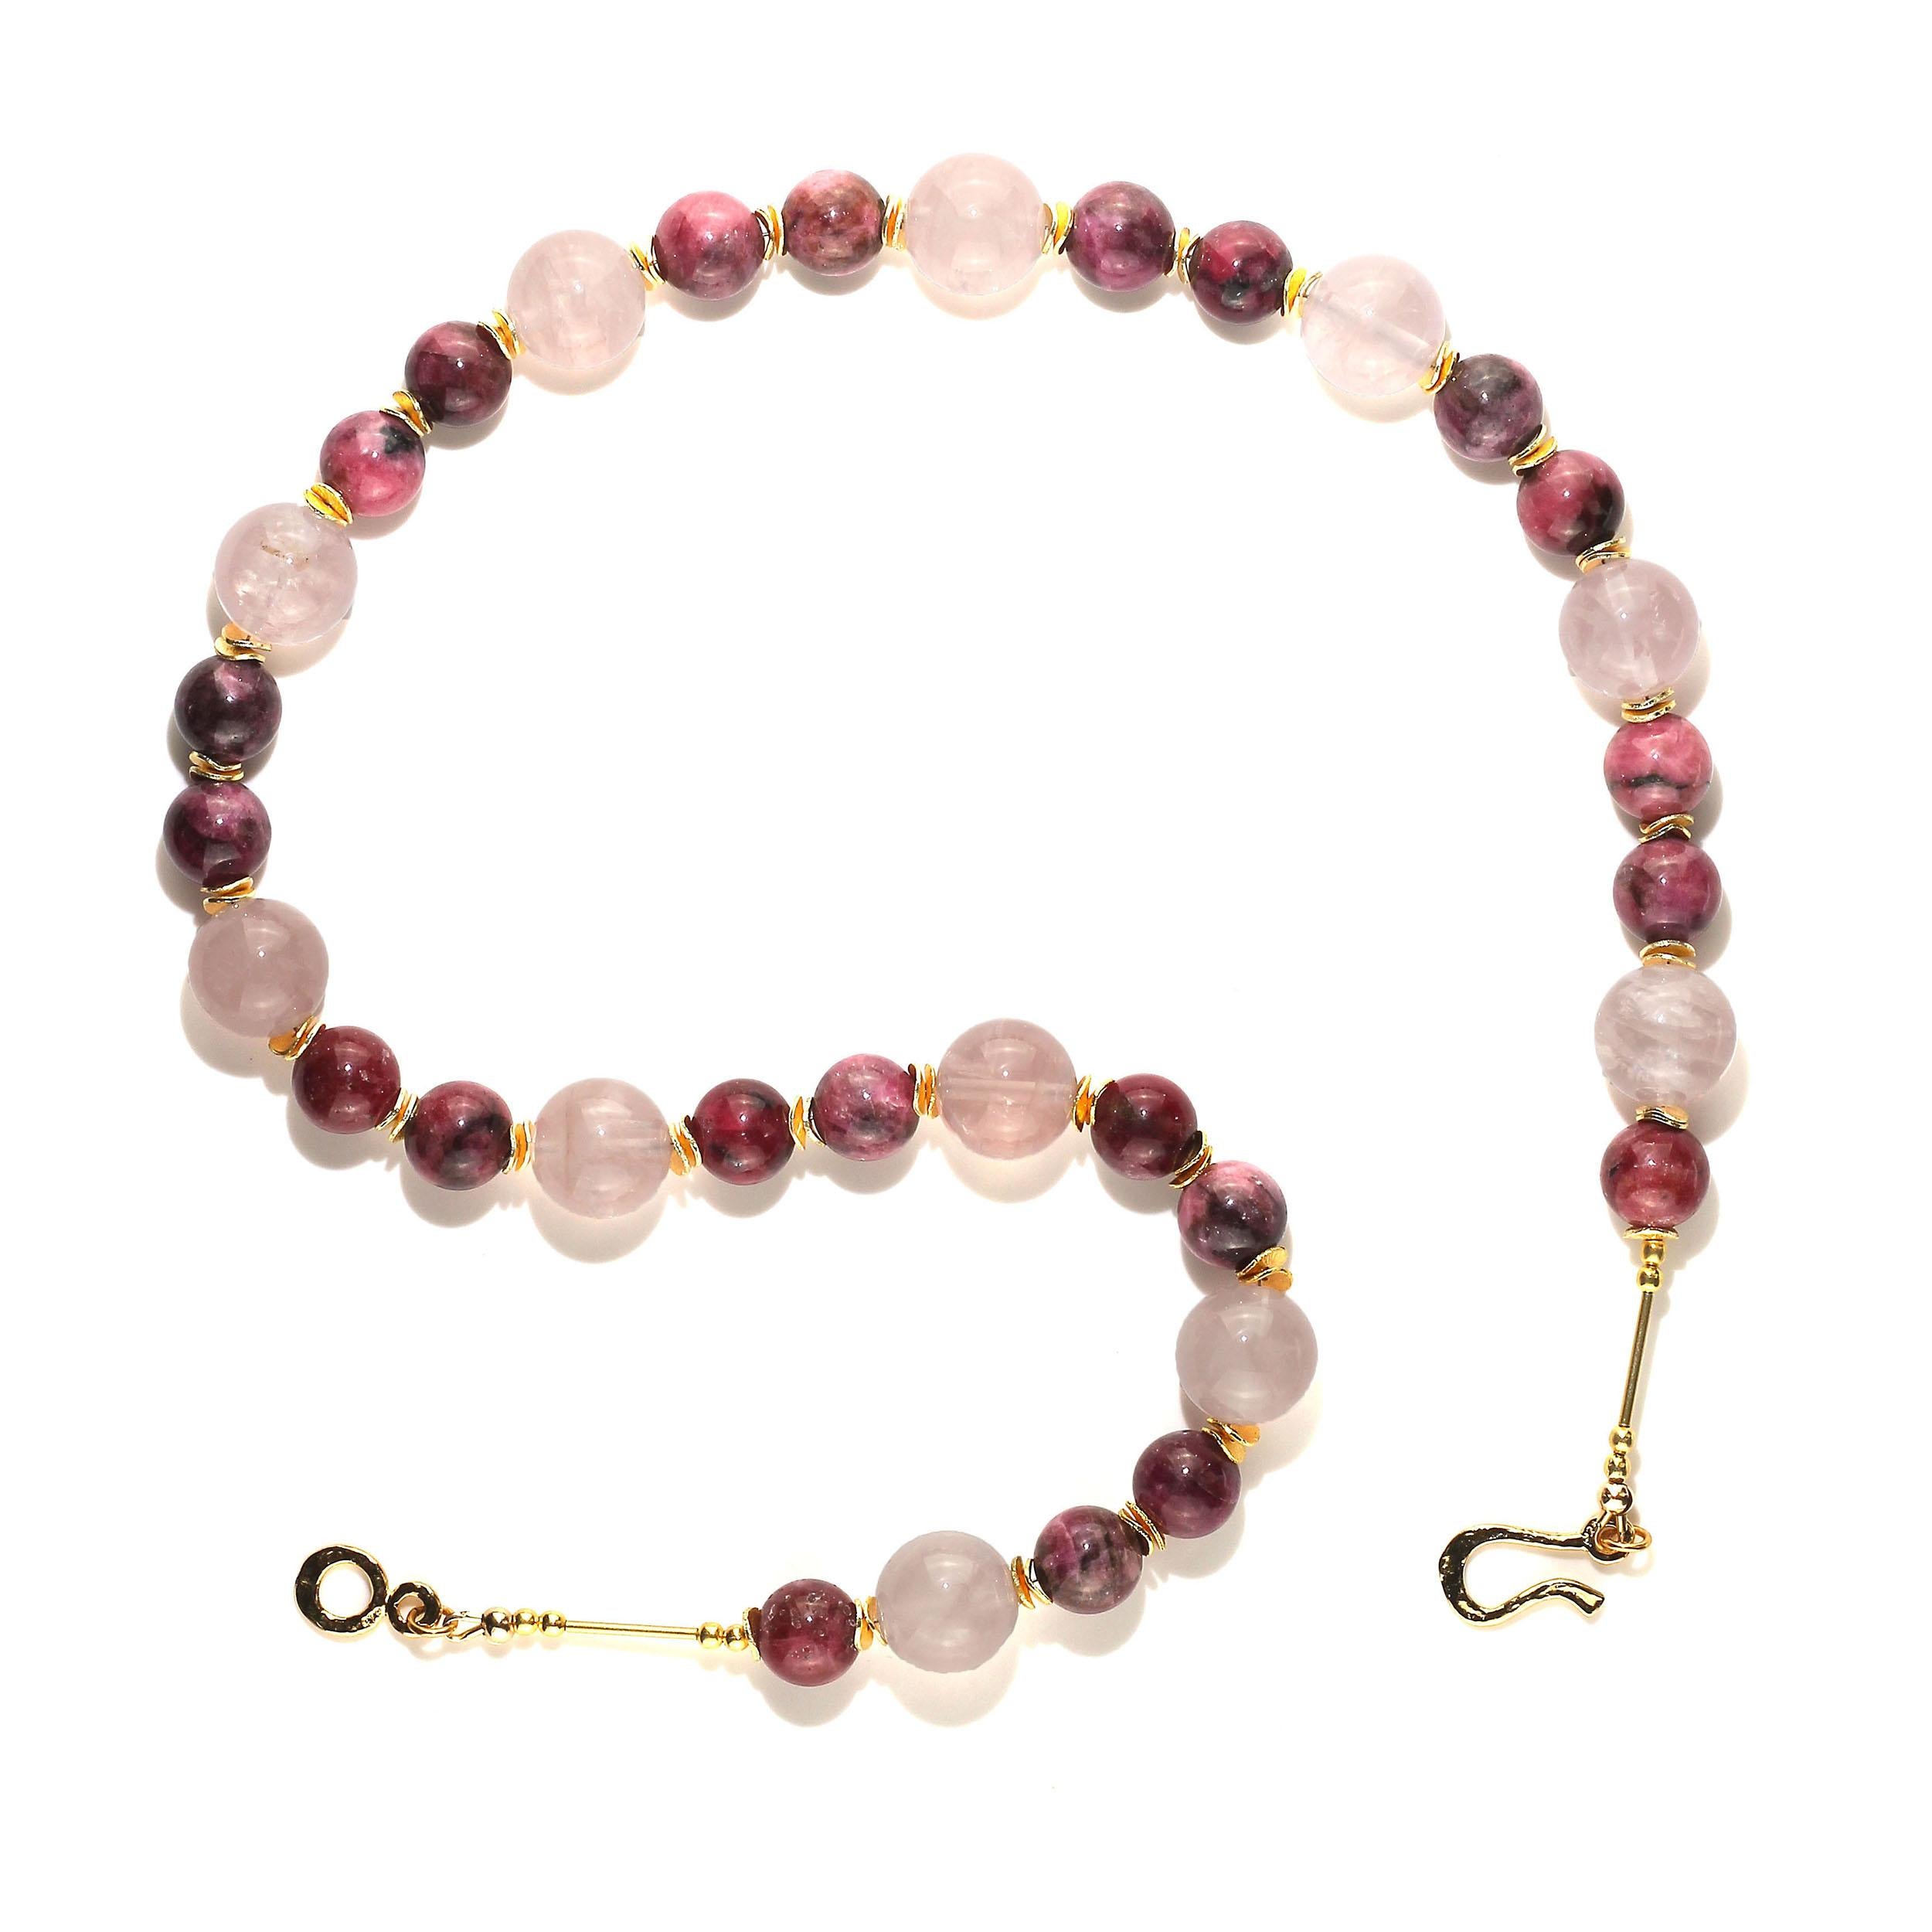 Bead AJD 24 Inch Necklace of Polished Rhodonite and Rose Quartz  Great Gift!!